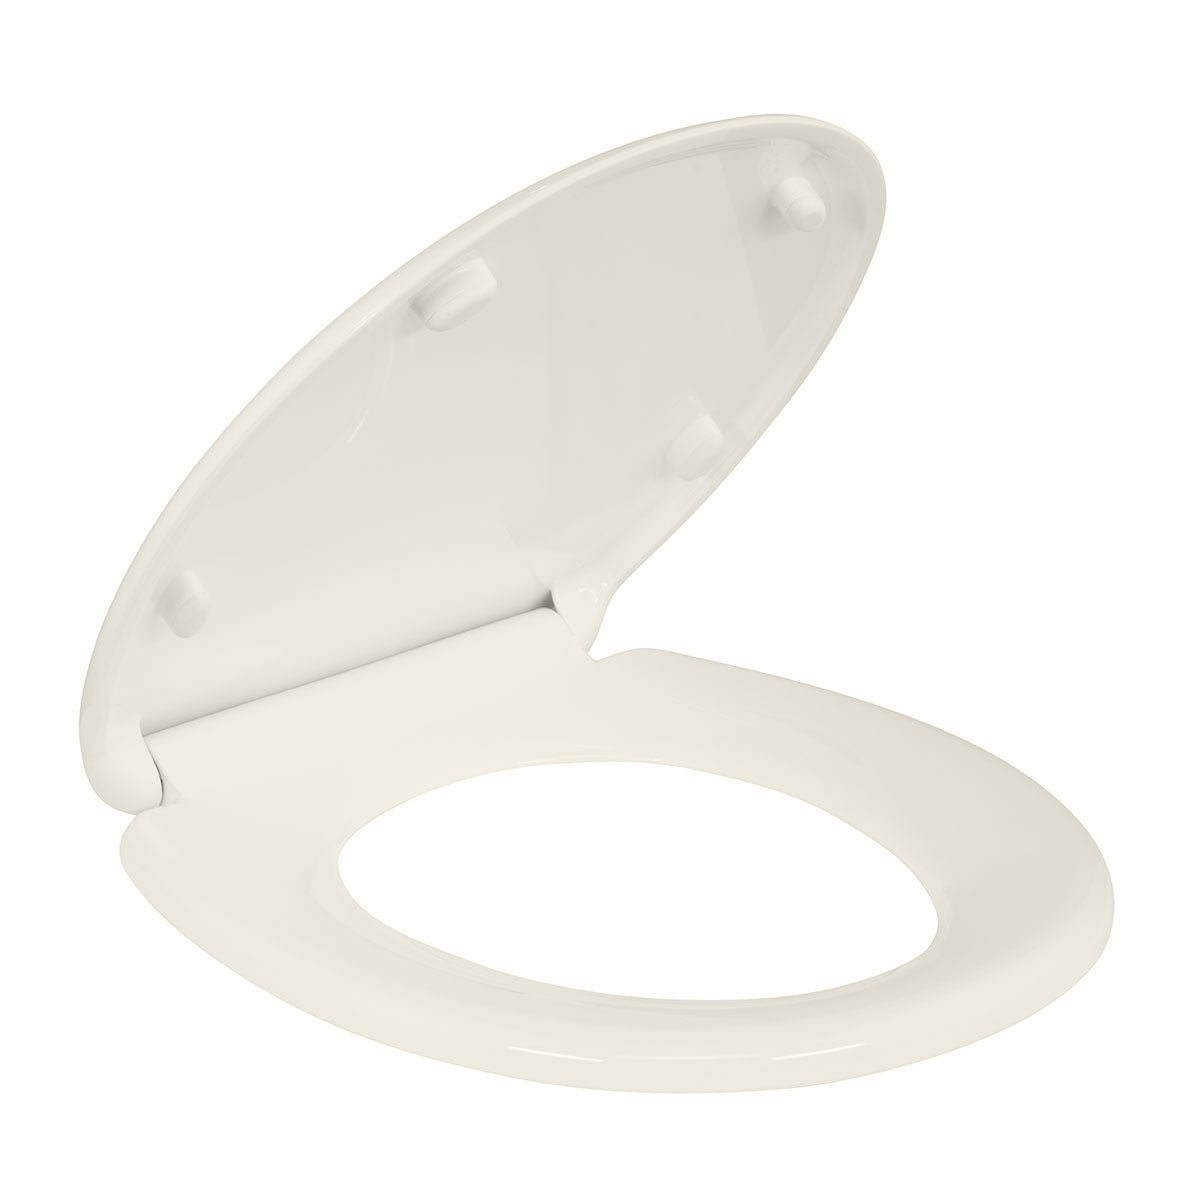 White Plastic Toilet Seat Cover, For Bathroom Fitting at Rs 500